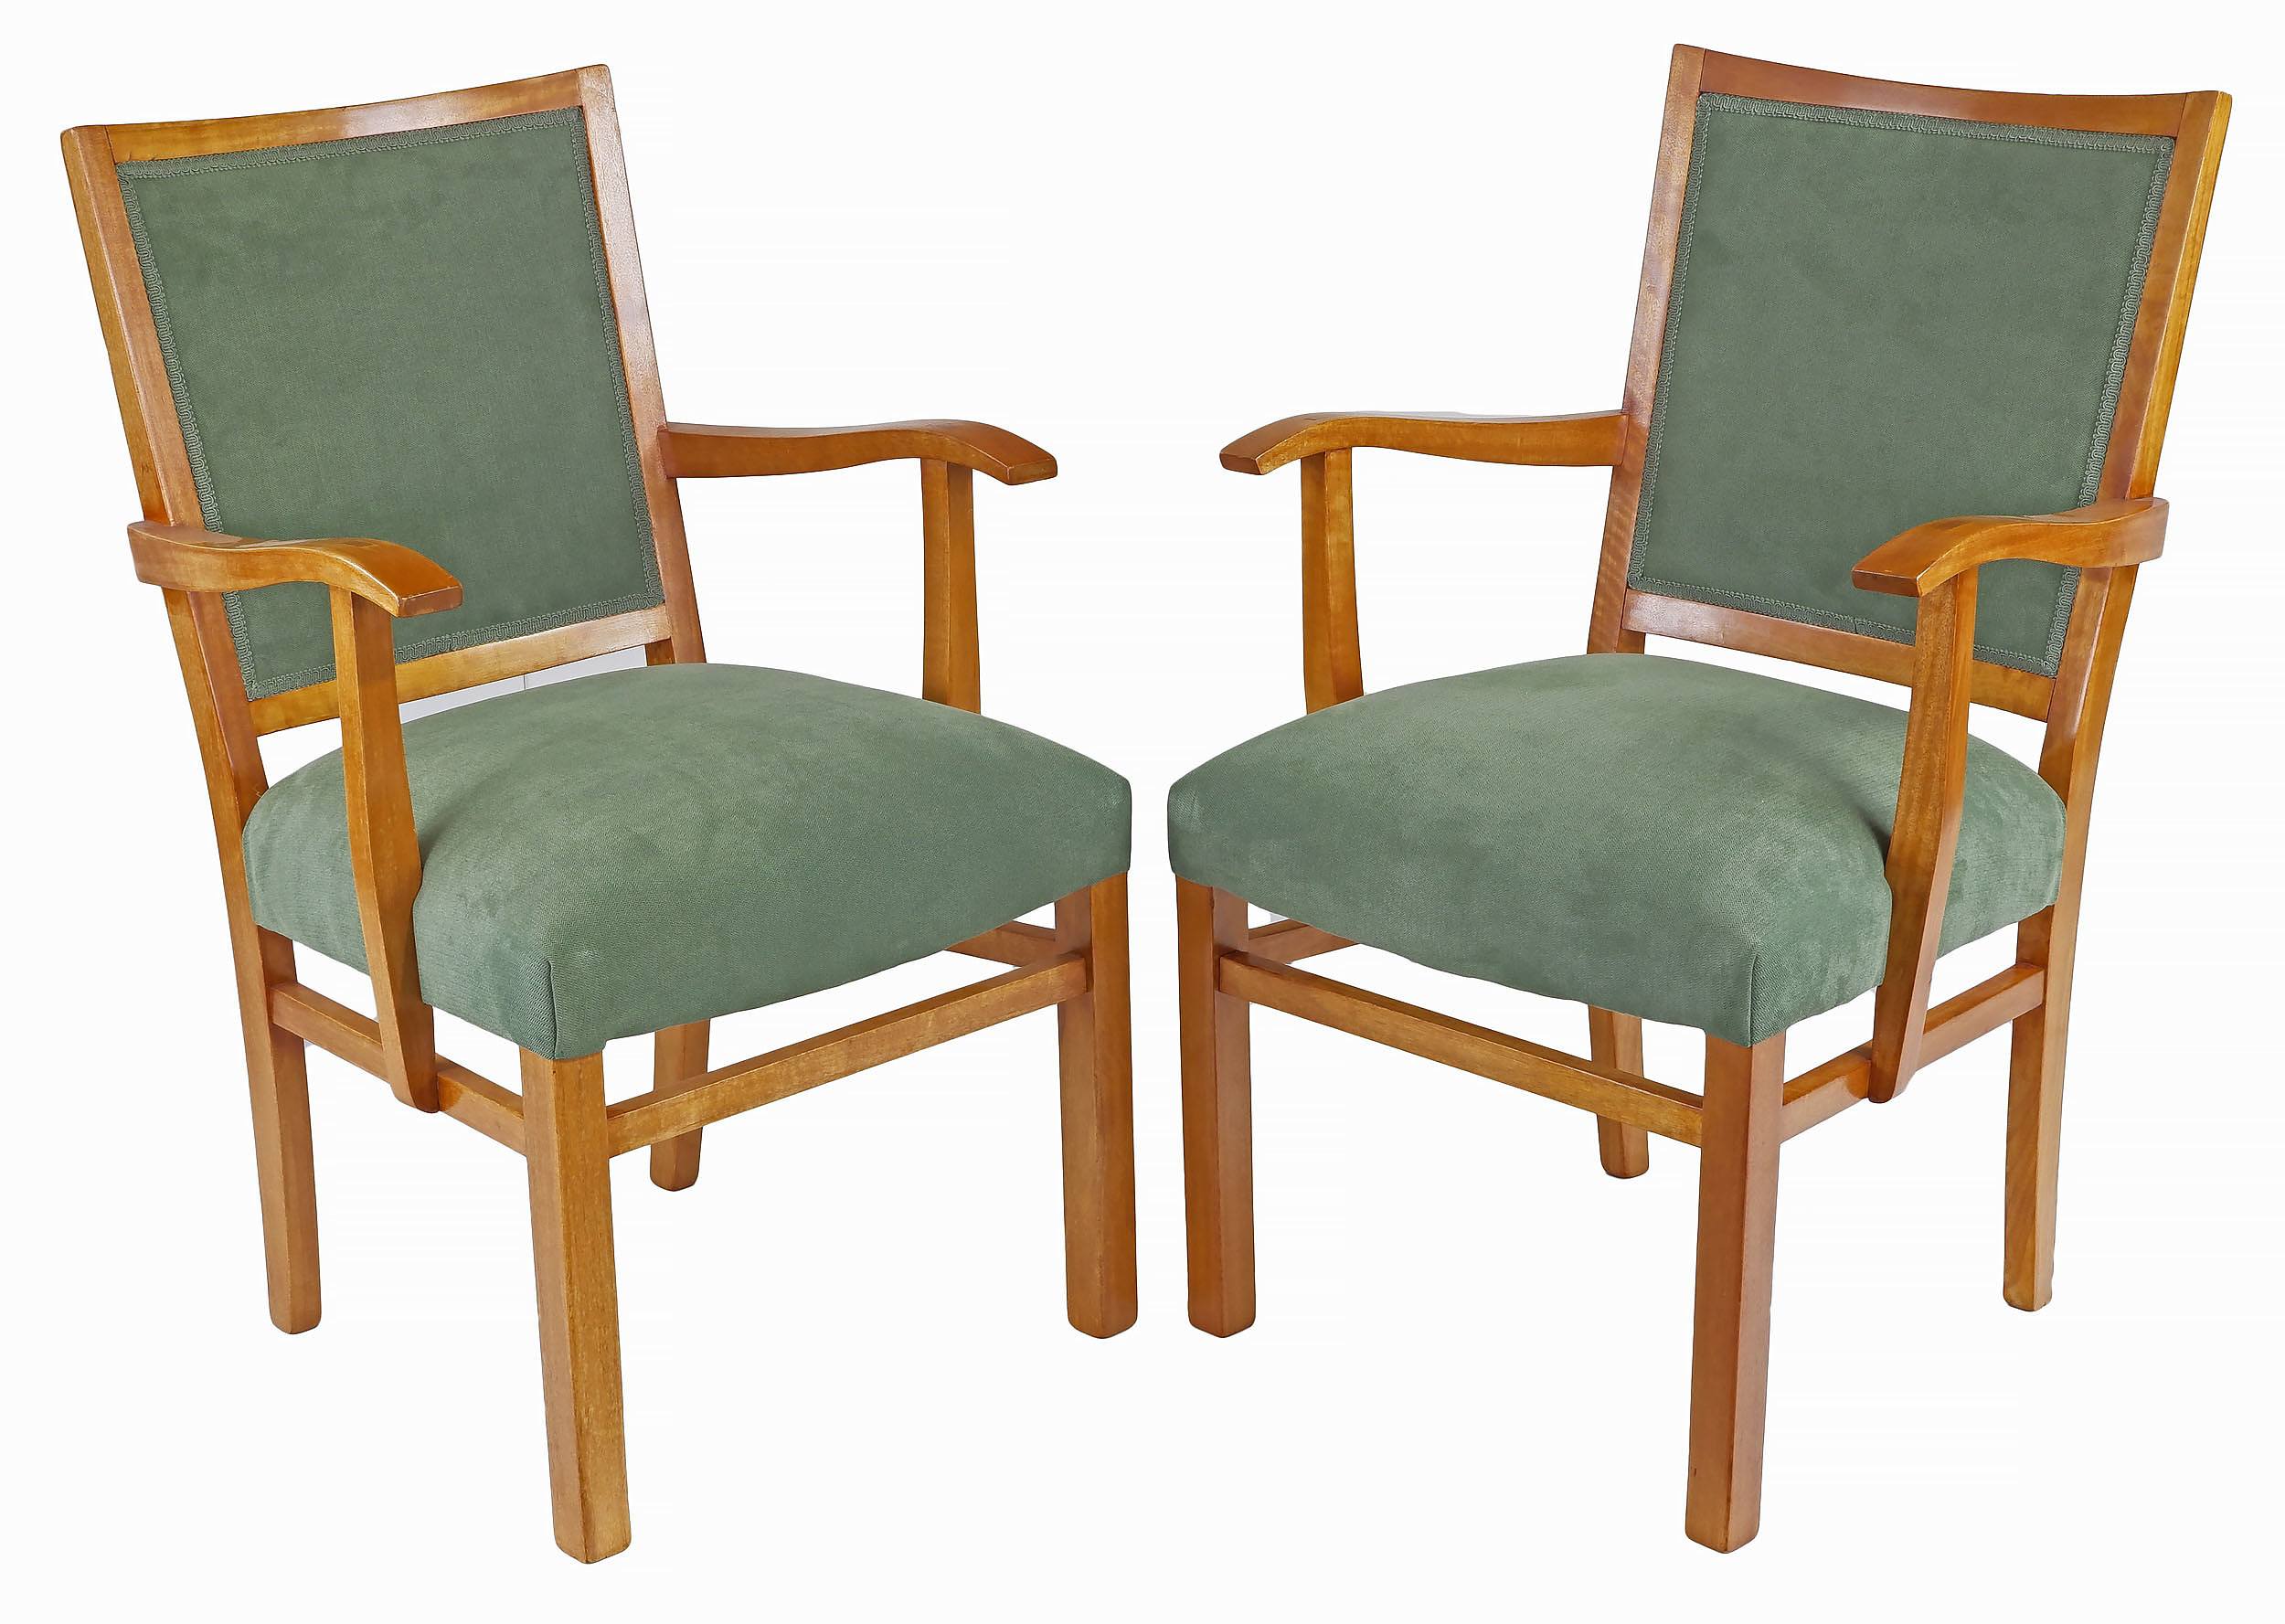 'Pair of Fred Ward Maple Armchairs'